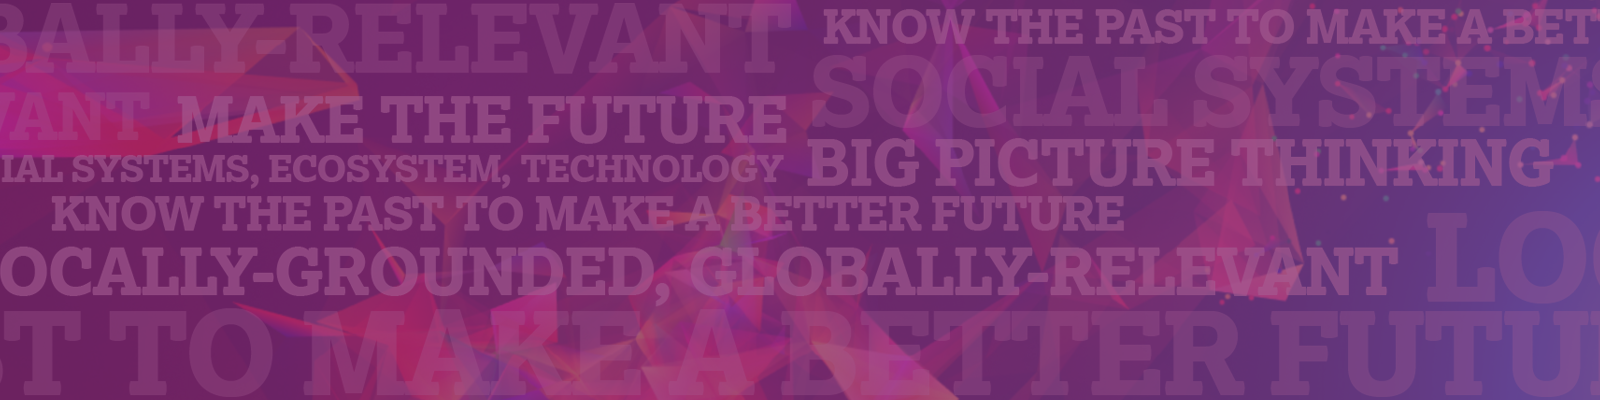 Abstract Text Image: Make the Future Better, Globally relevant, Locally Grounded, Know the Past,